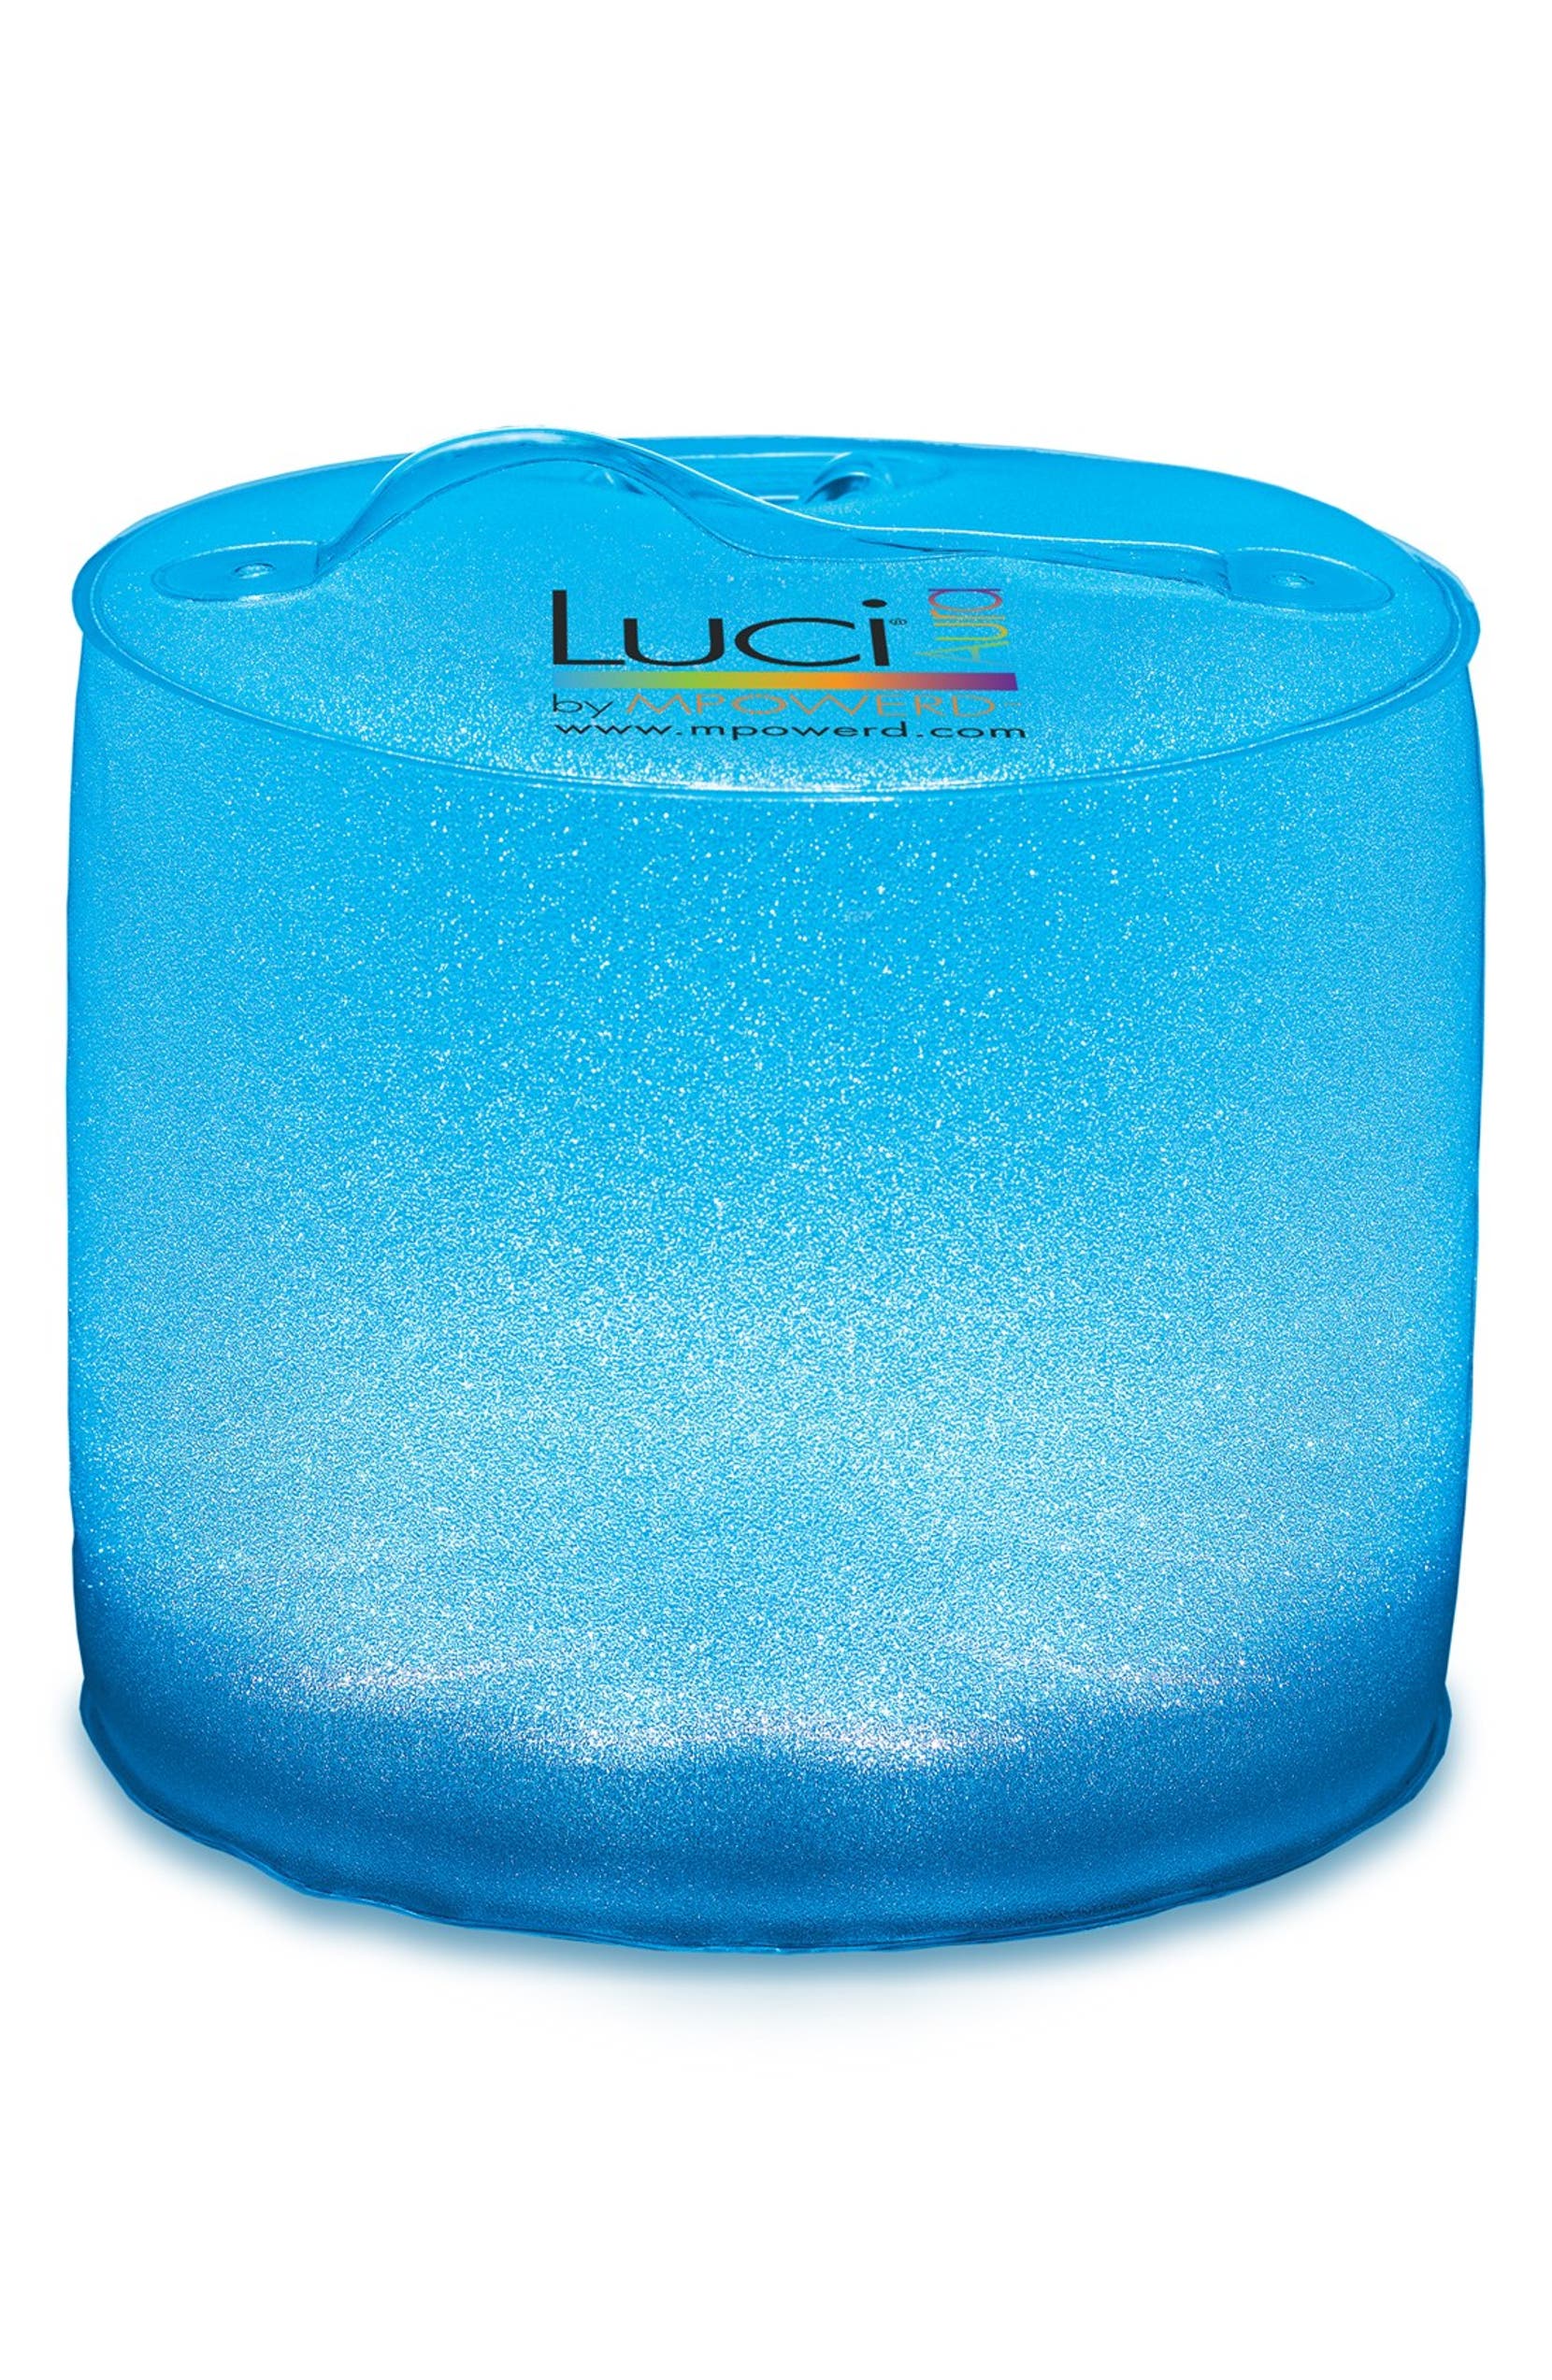 MPOWERD Luci by MPOWERD 'Aura' Inflatable Solar Lantern, Main, color, 100